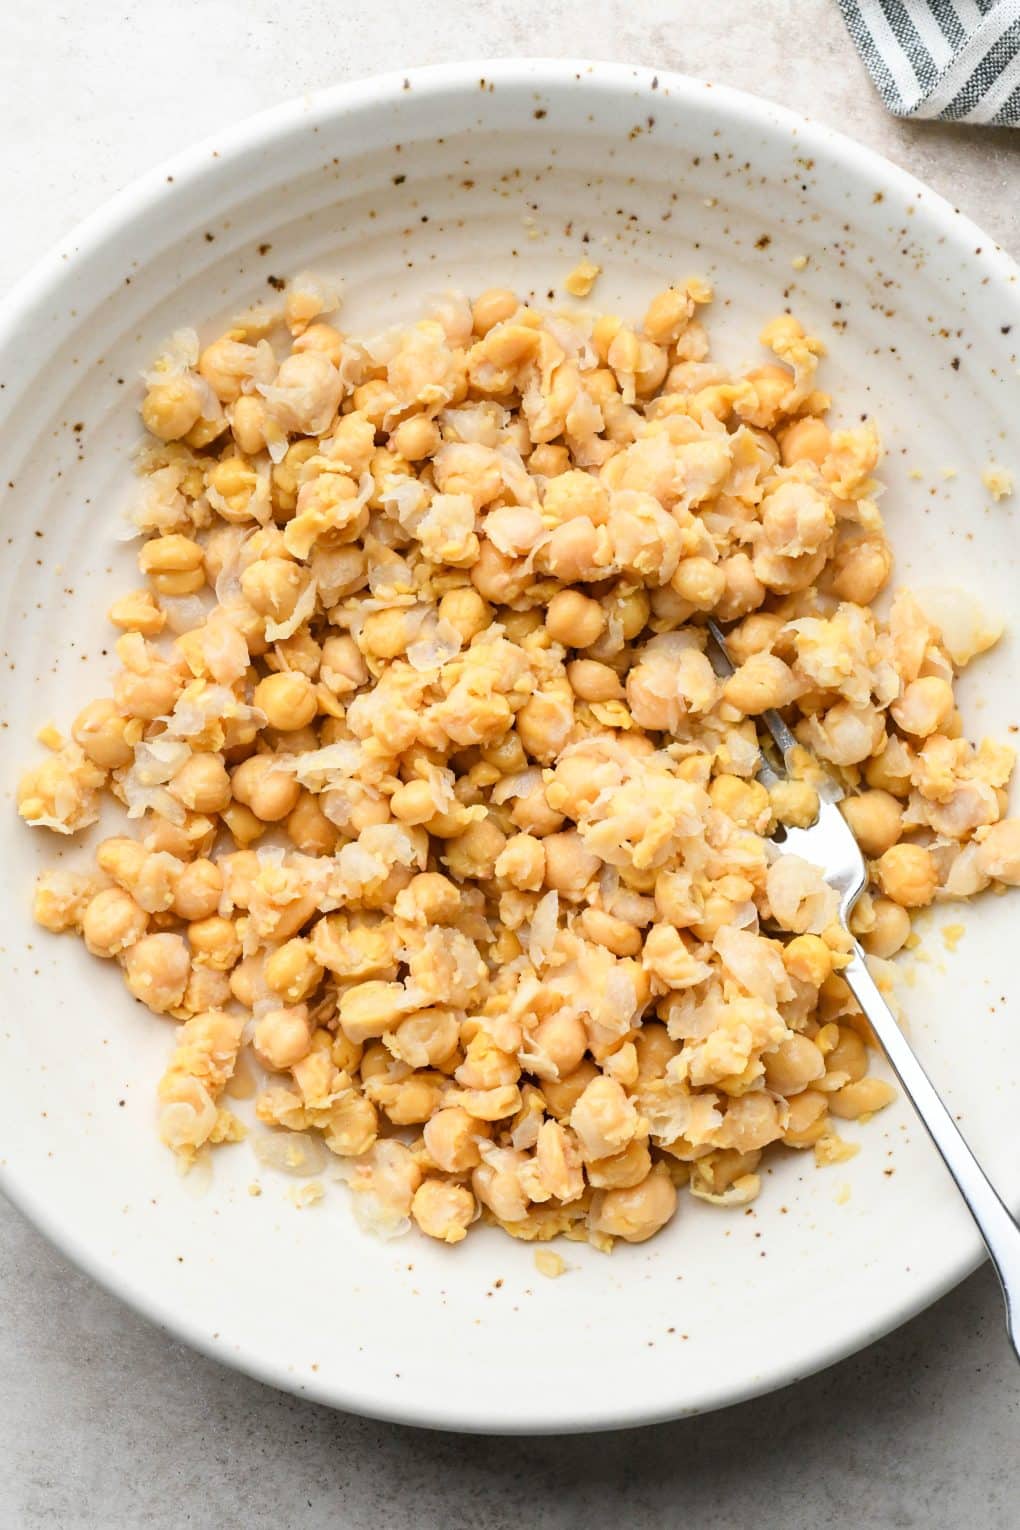 How to make smashed chickpea salad: Chickpeas roughly mashed in a large shallow bowl.